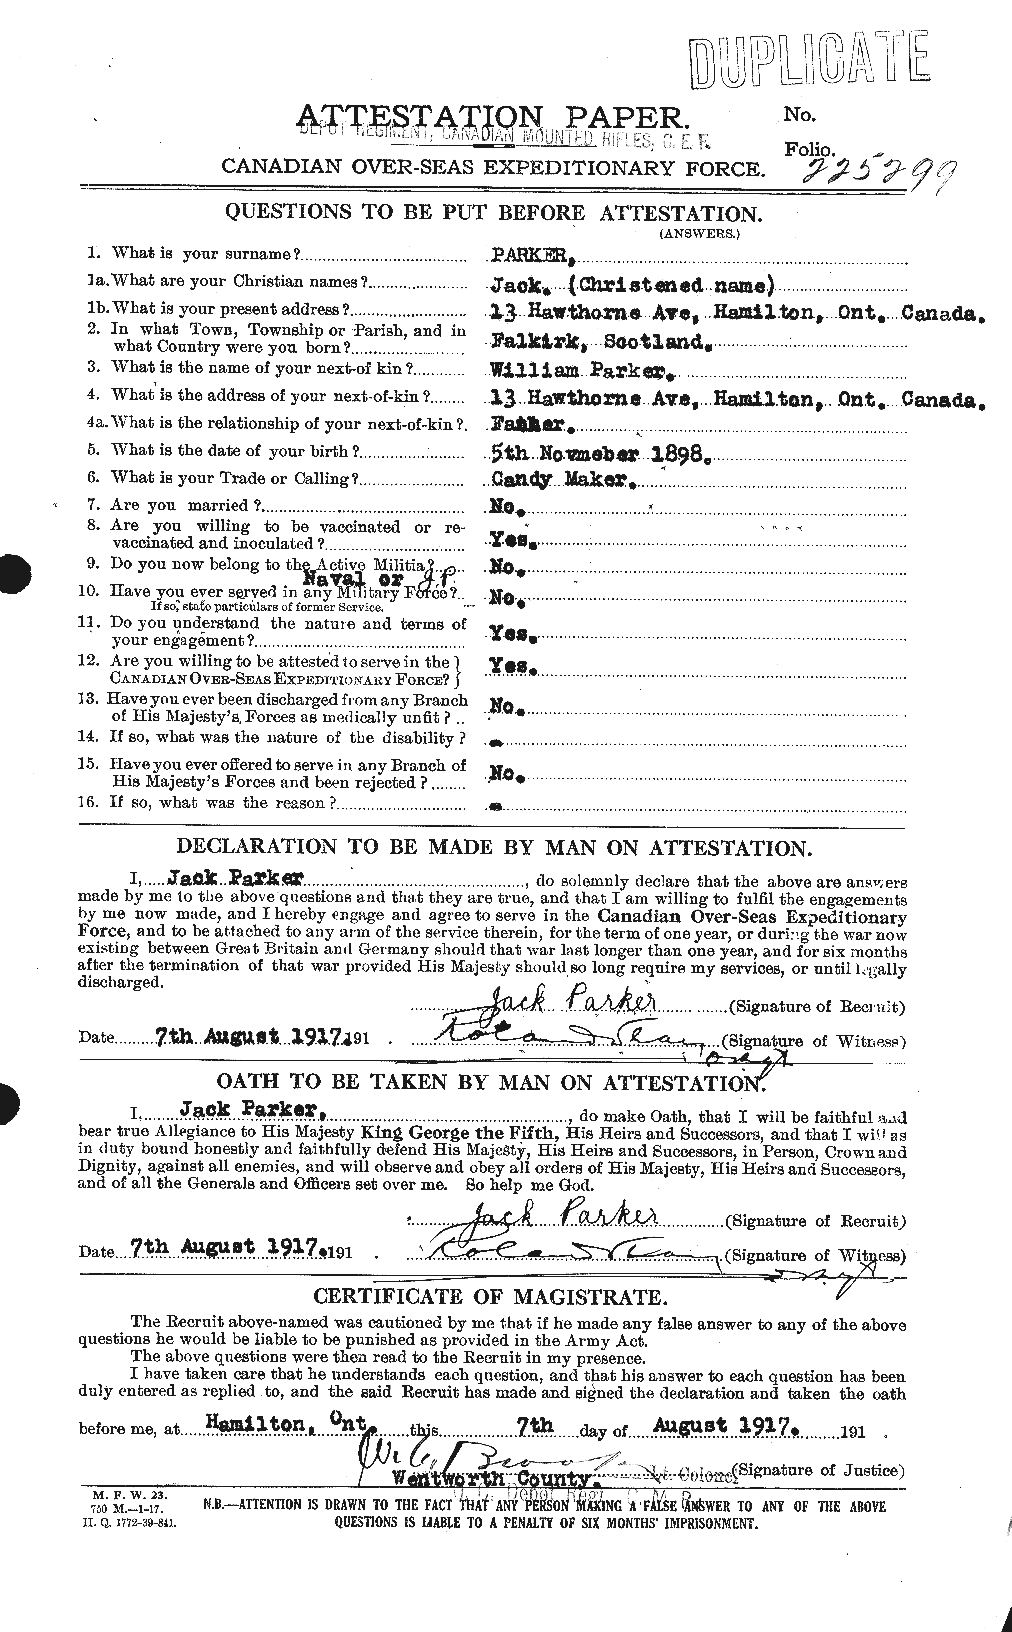 Personnel Records of the First World War - CEF 565405a